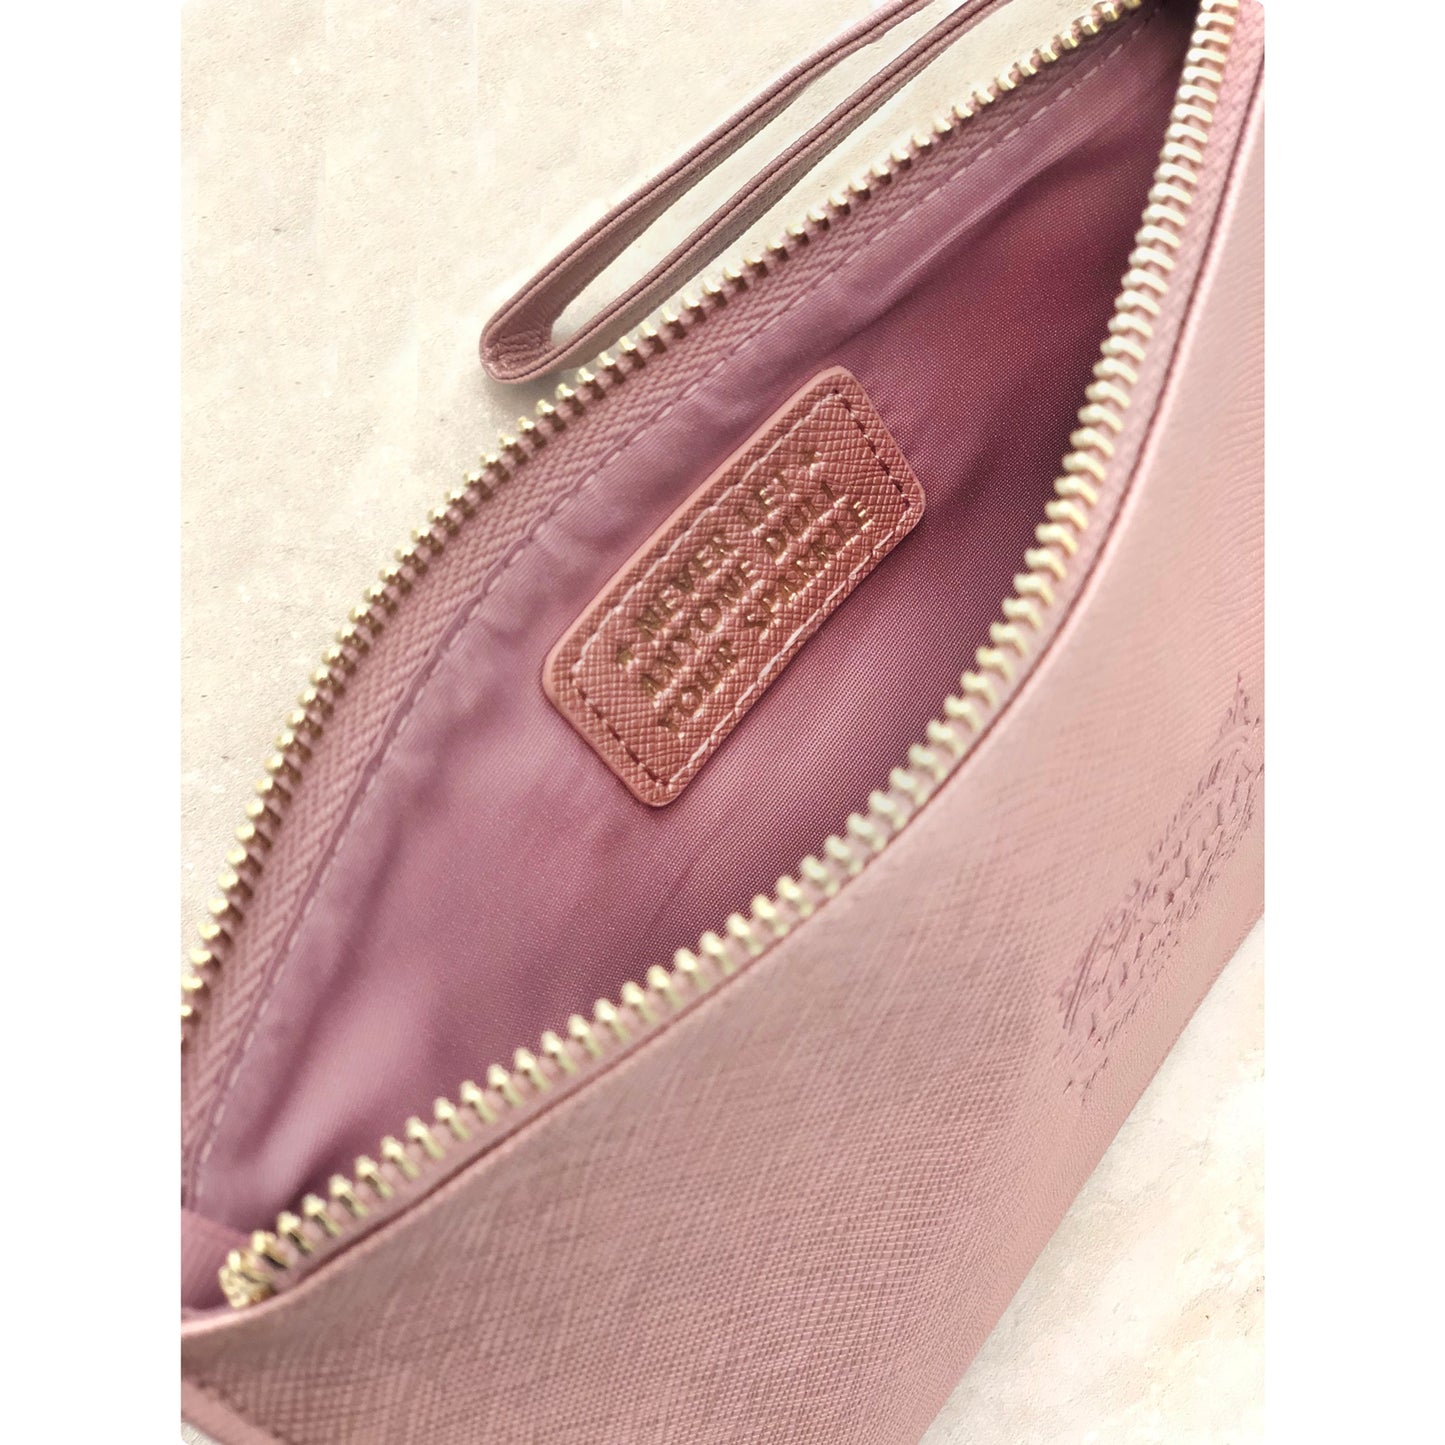 Clutch Bag With Handle & Embossed Text "Julie"